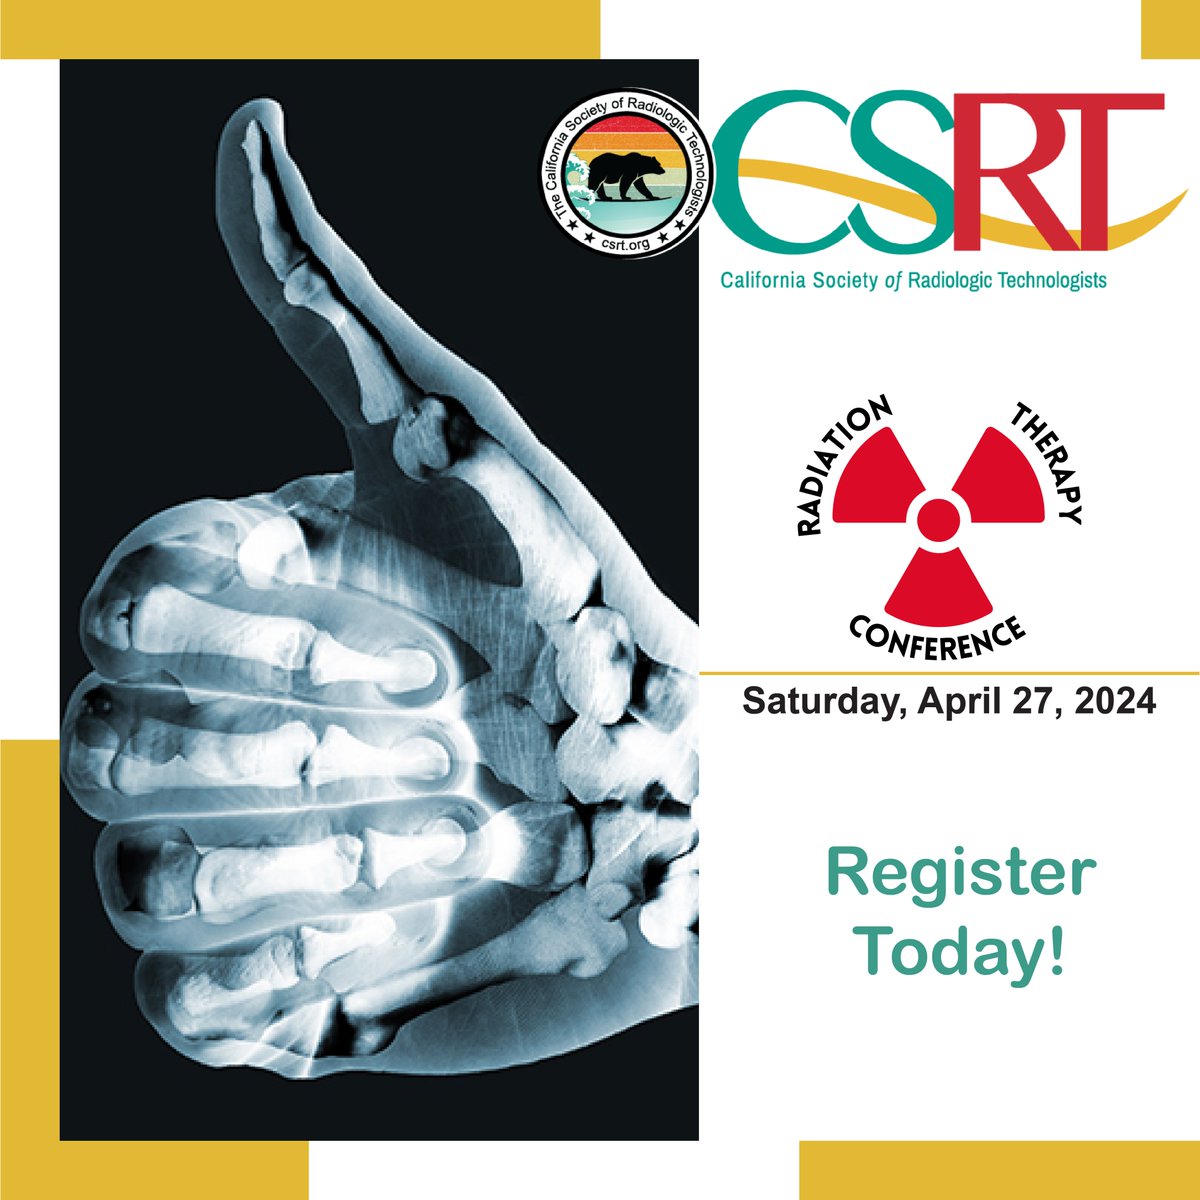 📣 Only one week left to register! Don’t miss your chance to join us at the CSRT 2023 Virtual Radiation Therapy Conference.🔗 Register now bit.ly/CSRT_RTC24.
#CSRT2023 #RadiationTherapy #VirtualConference